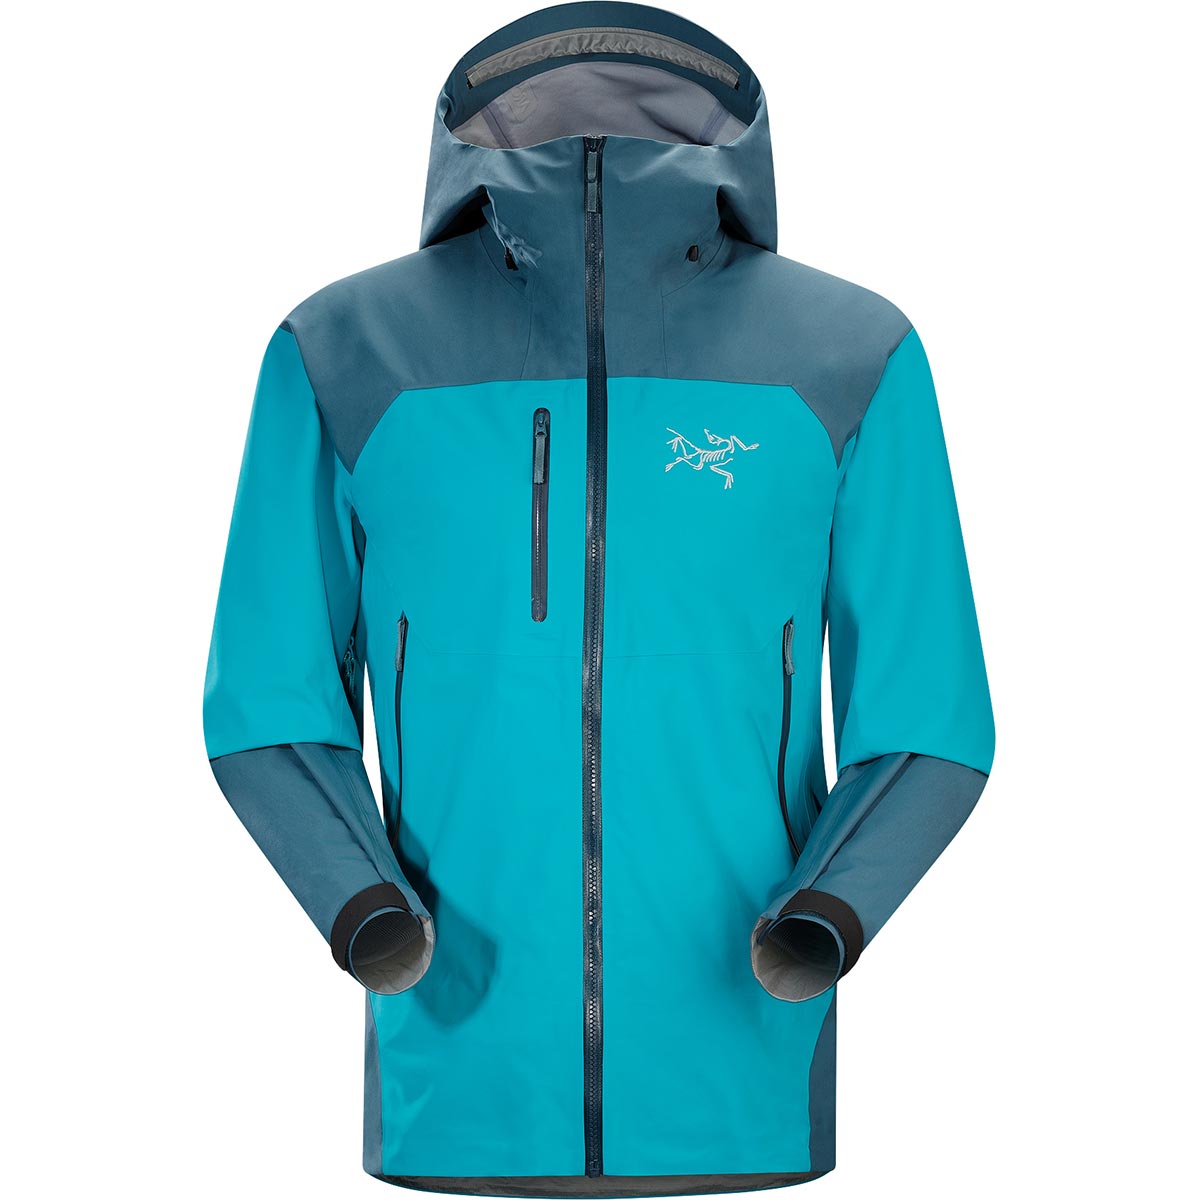 Arc'teryx Tantalus Jacket, men's, discontinued colors (free ground ...